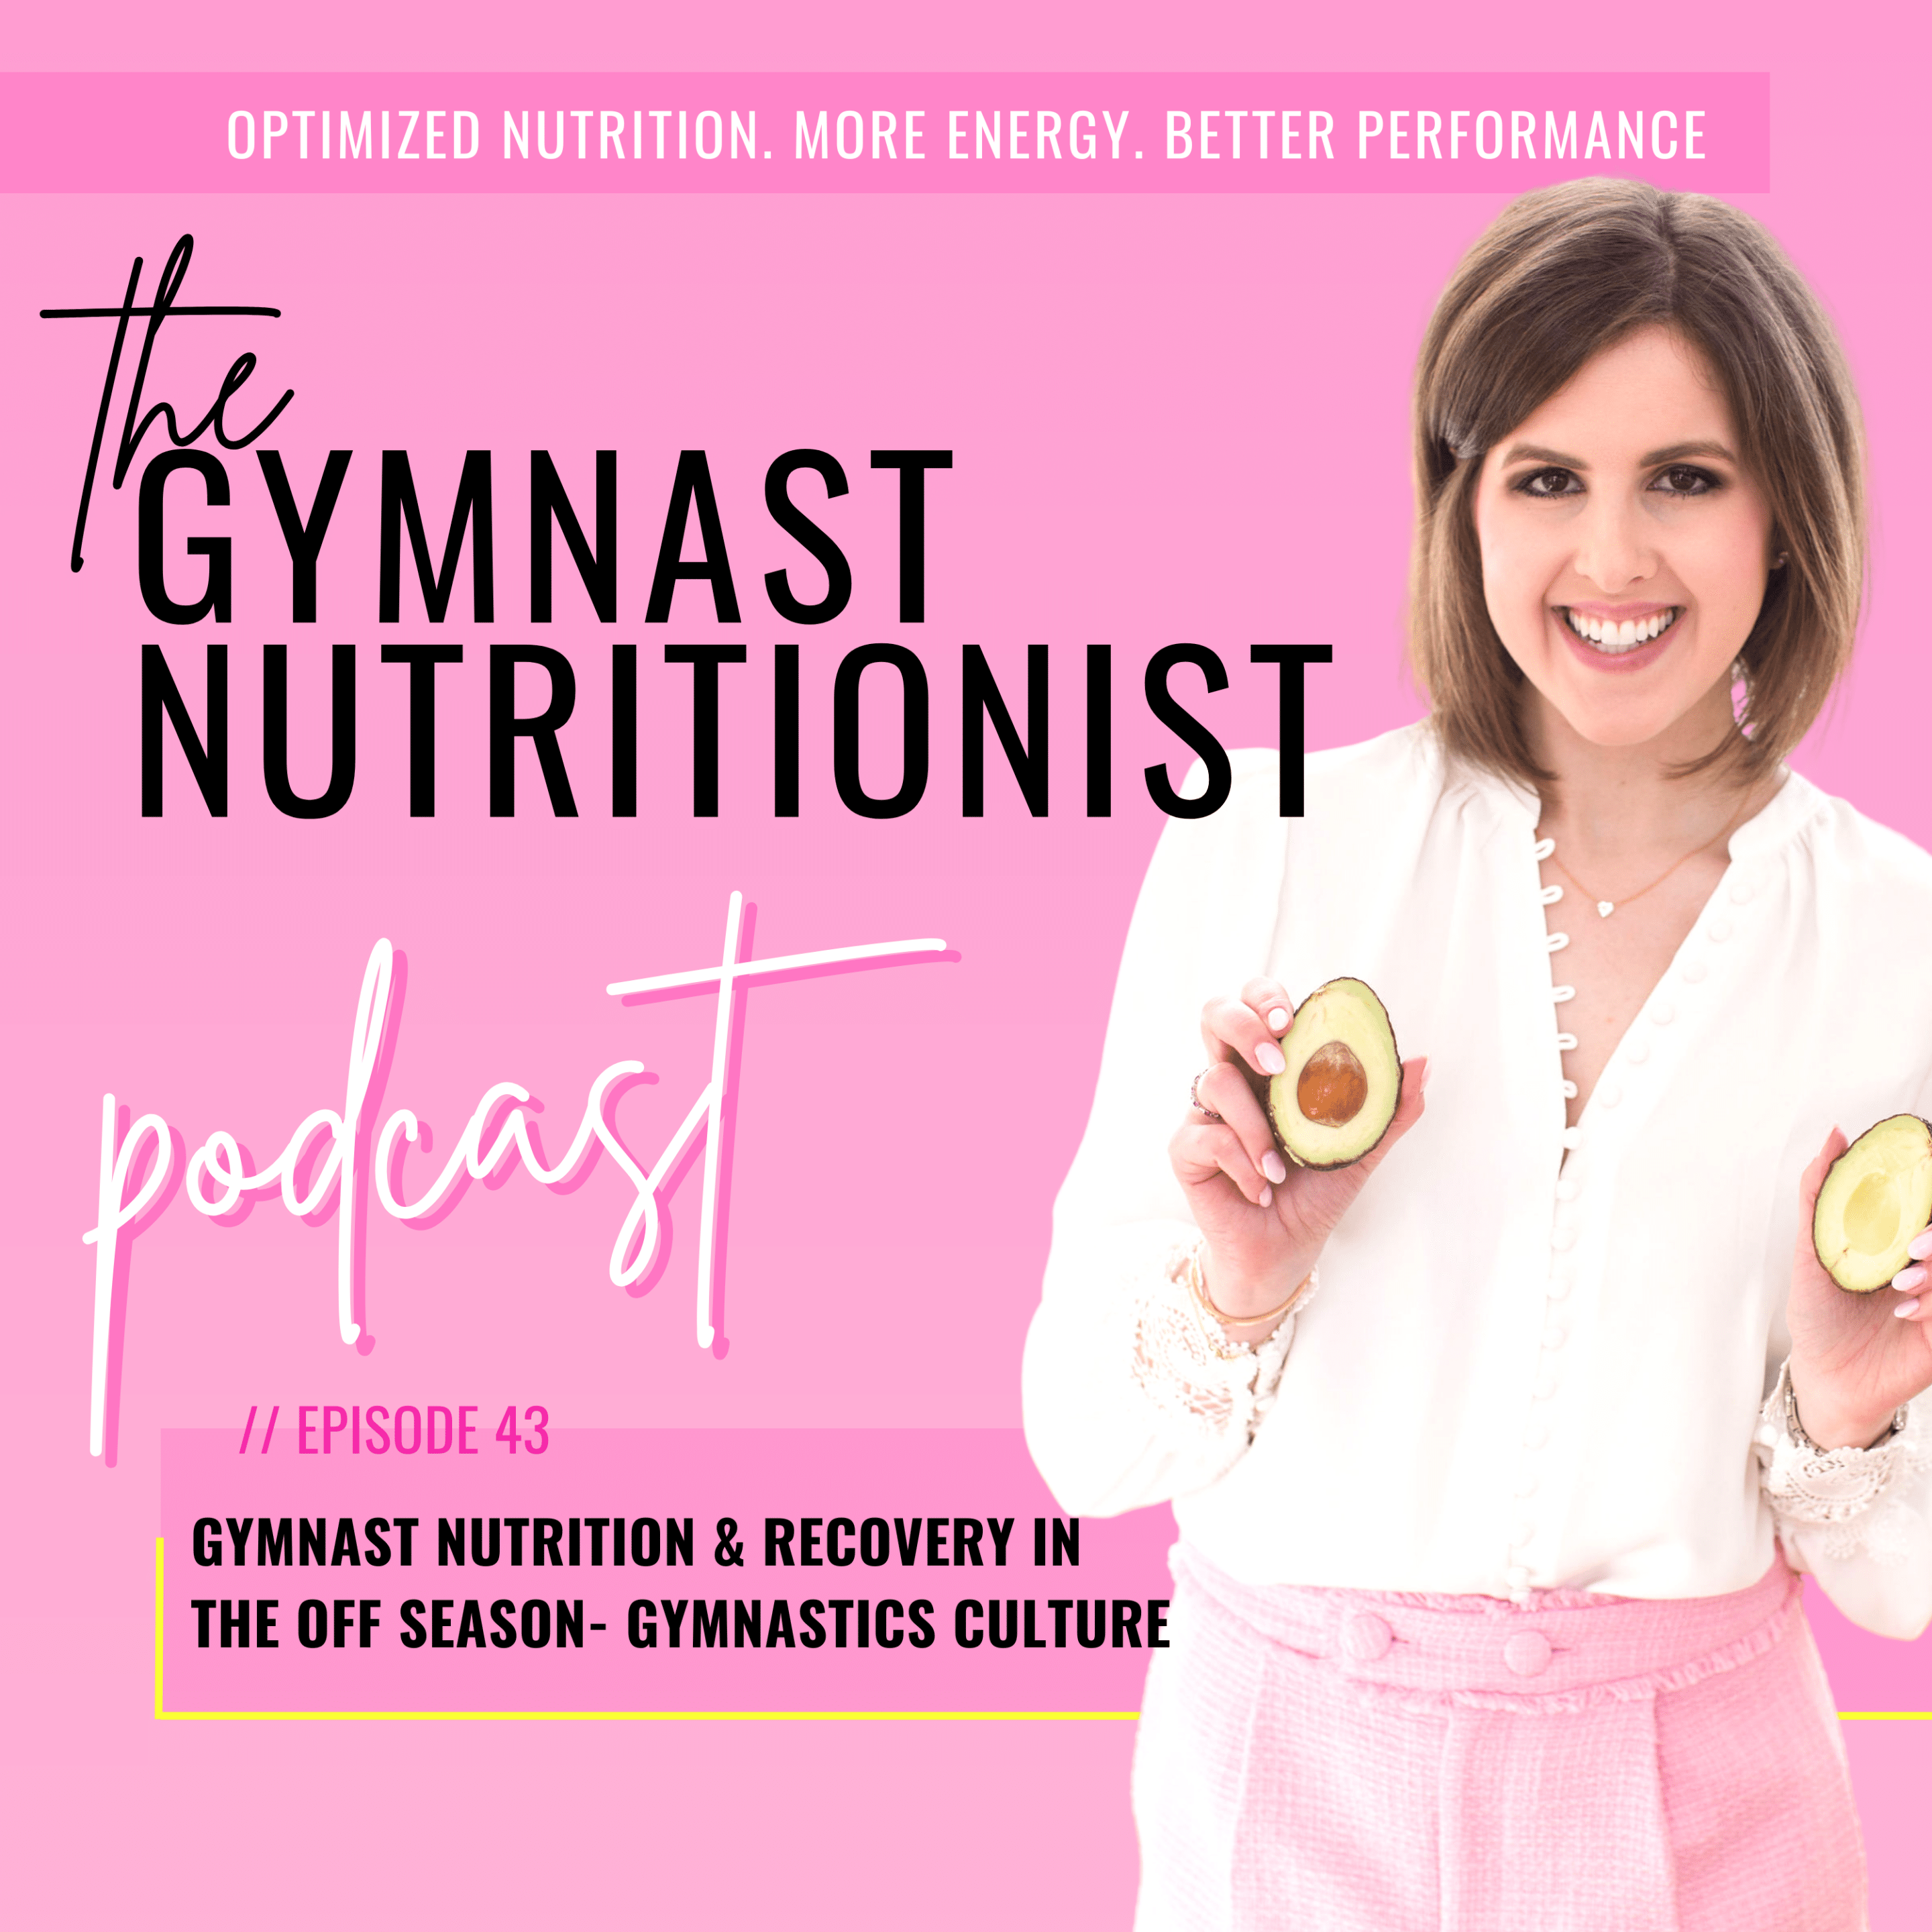 Episode 43: Gymnast Nutrition & Recovery in the Off Season- Gymnastics Culture